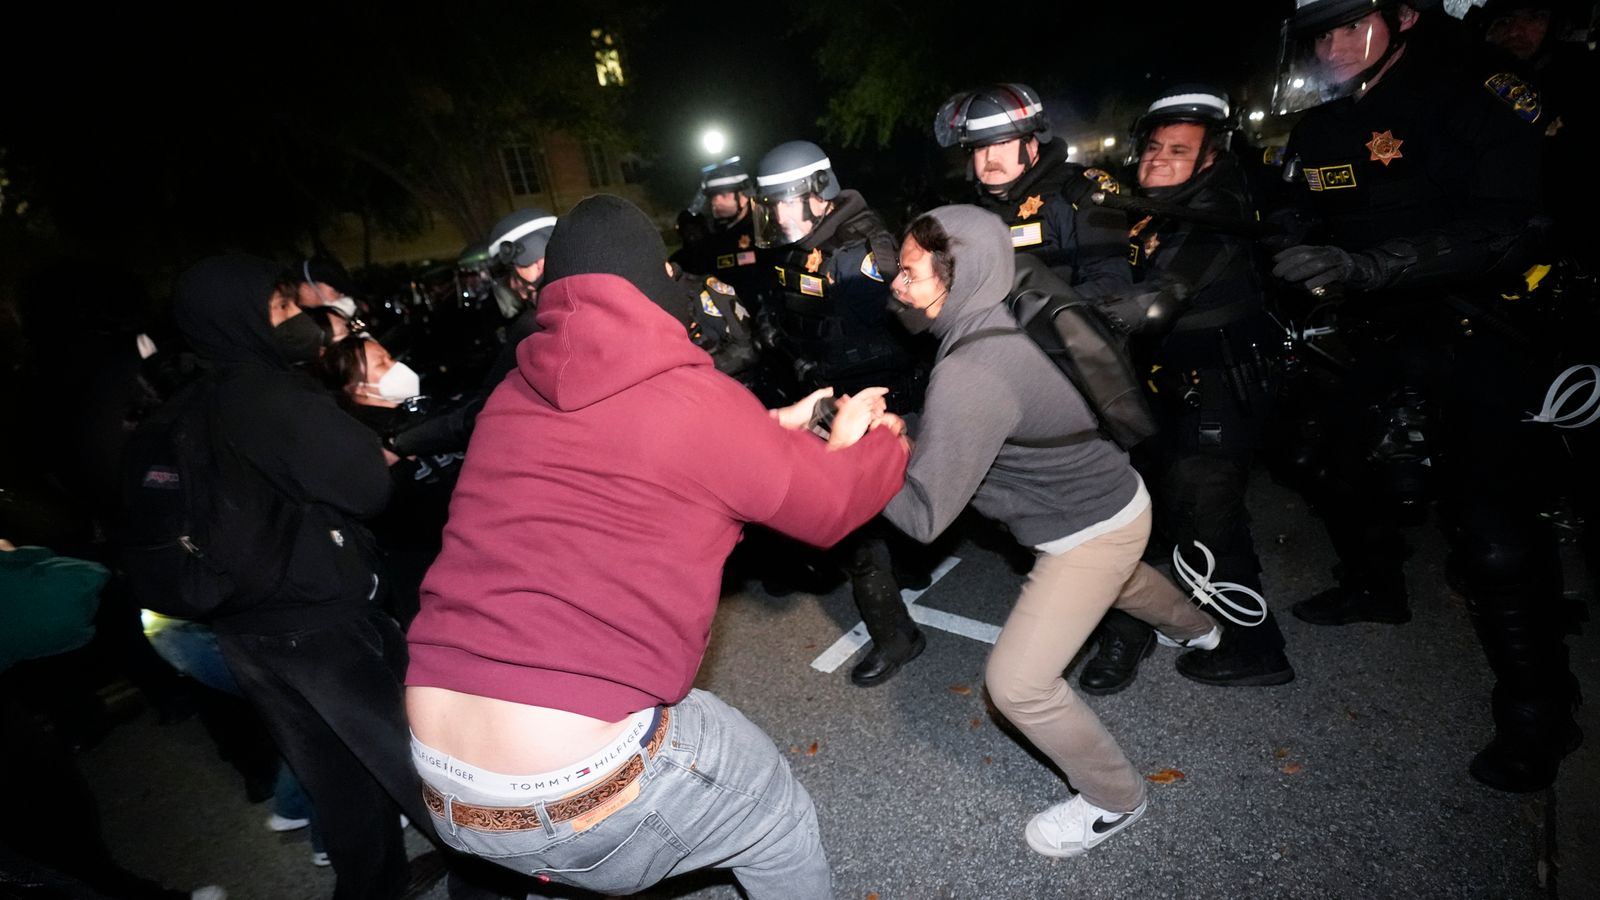 'part of the american spirit': arrested student denies protests are violent